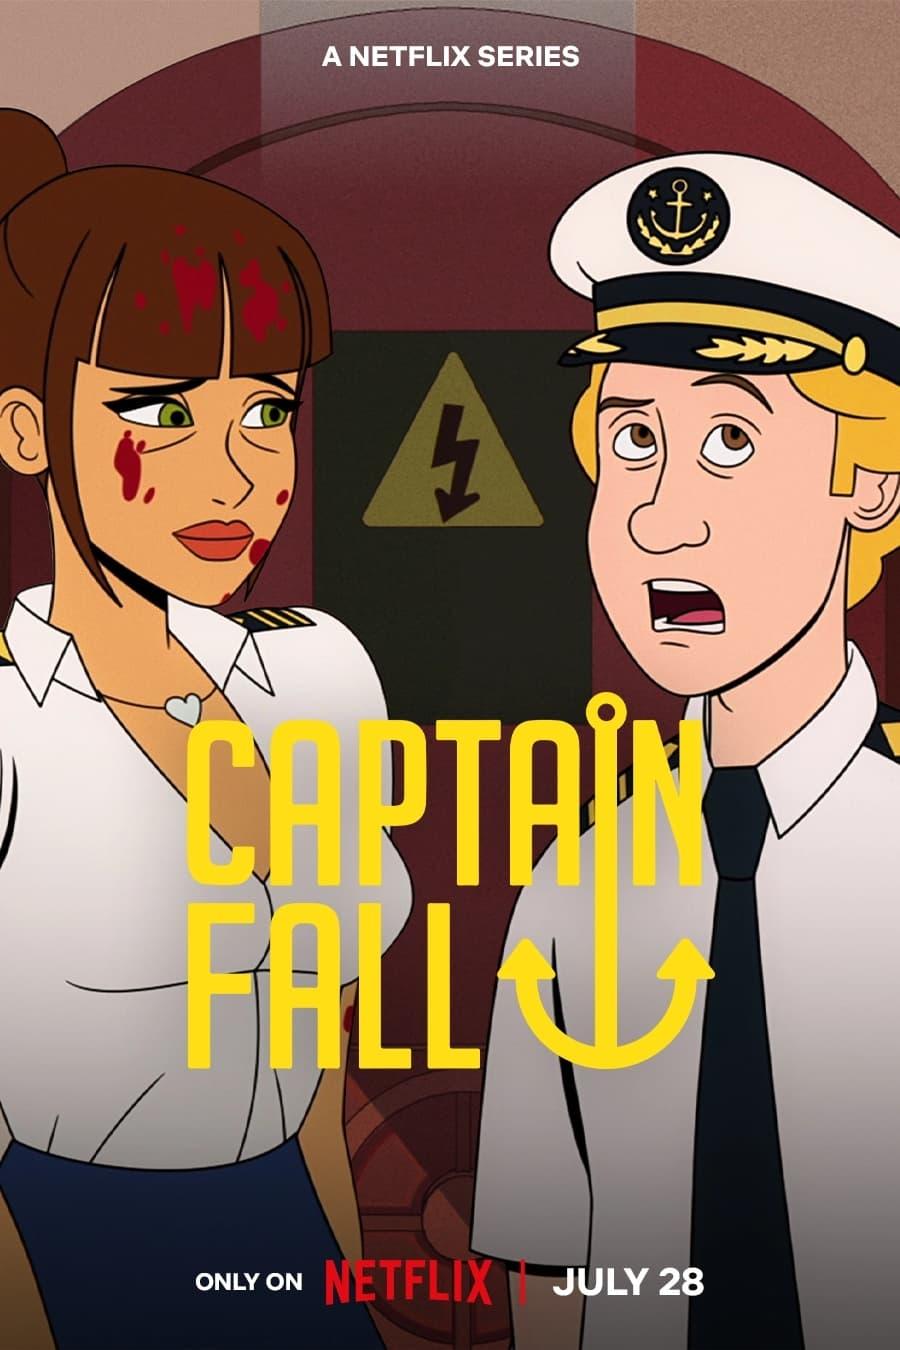 Captain Fall poster